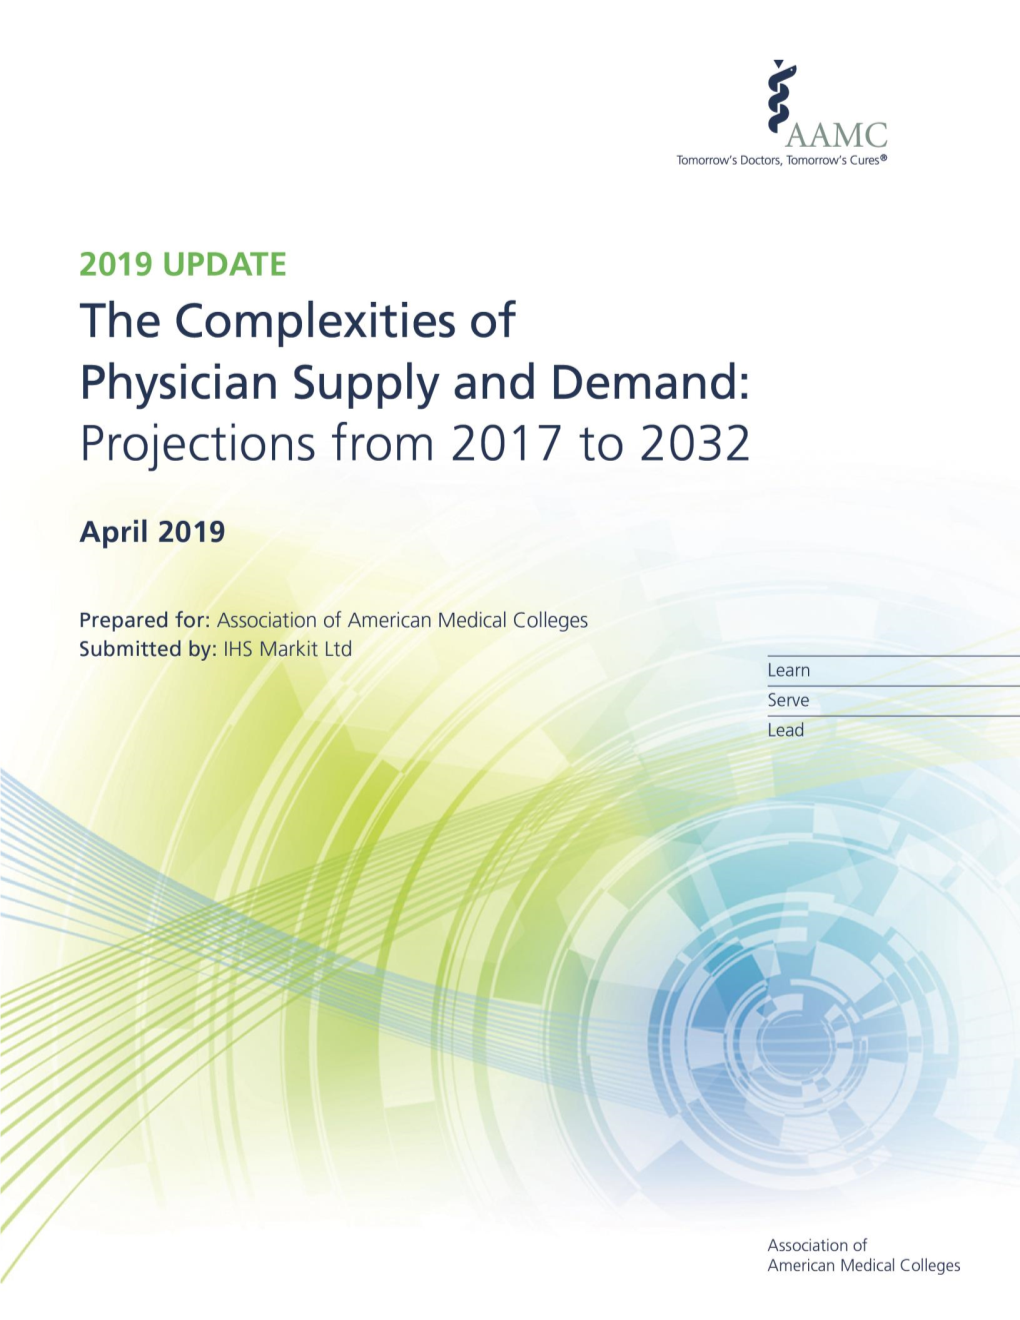 The Complexities of Physician Supply and Demand: Projections from 2017 to 2032